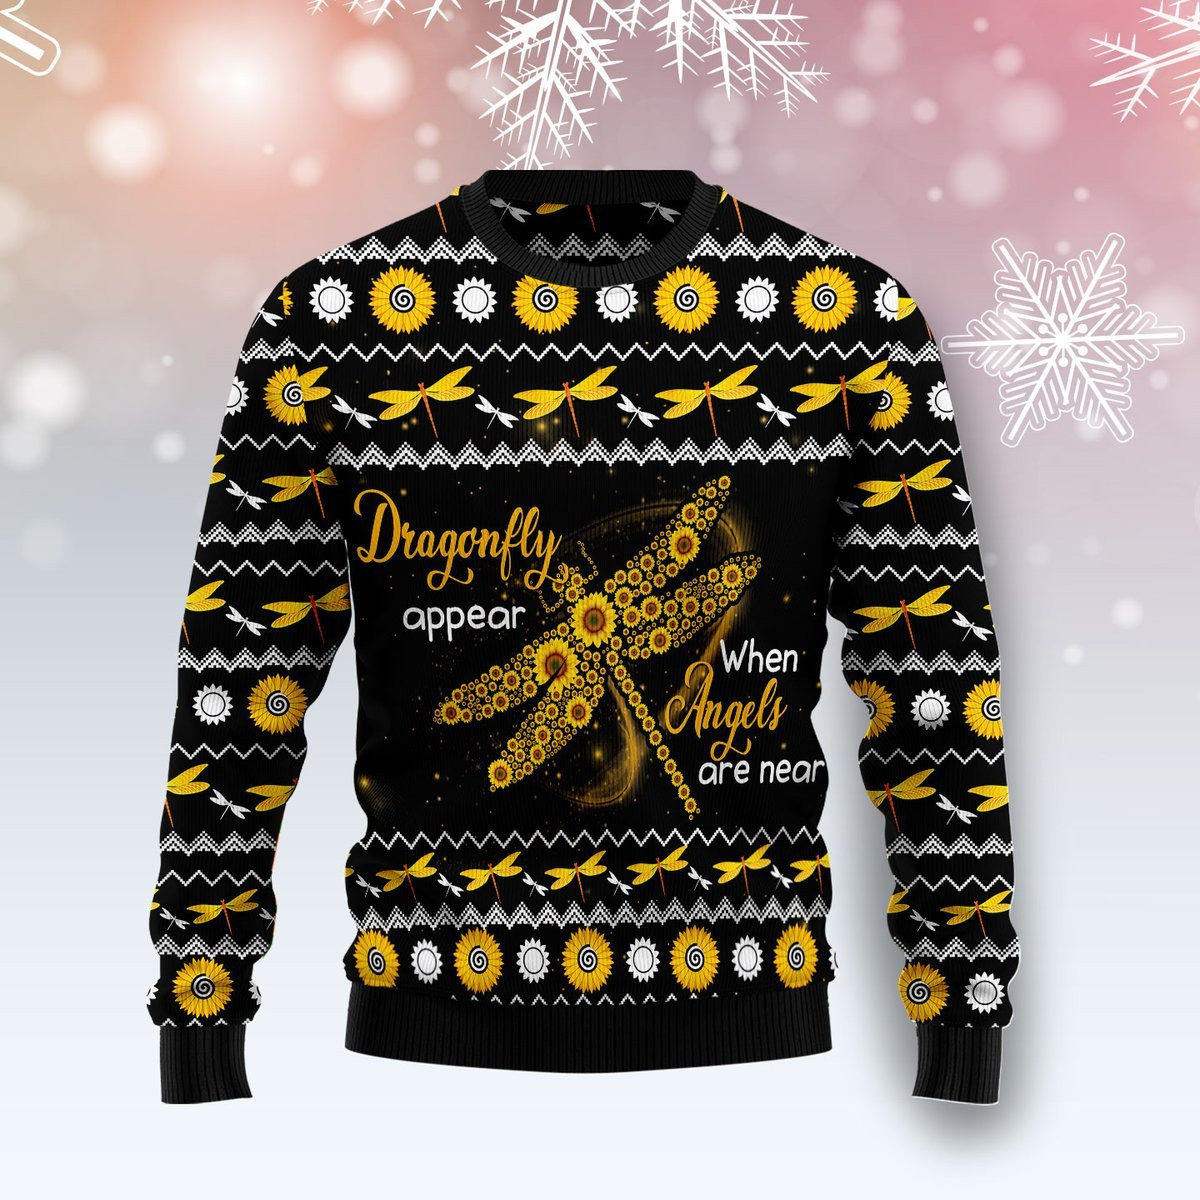 Dragonfly Sunflower Ugly Christmas Sweater Ugly Sweater For Men Women, Holiday Sweater